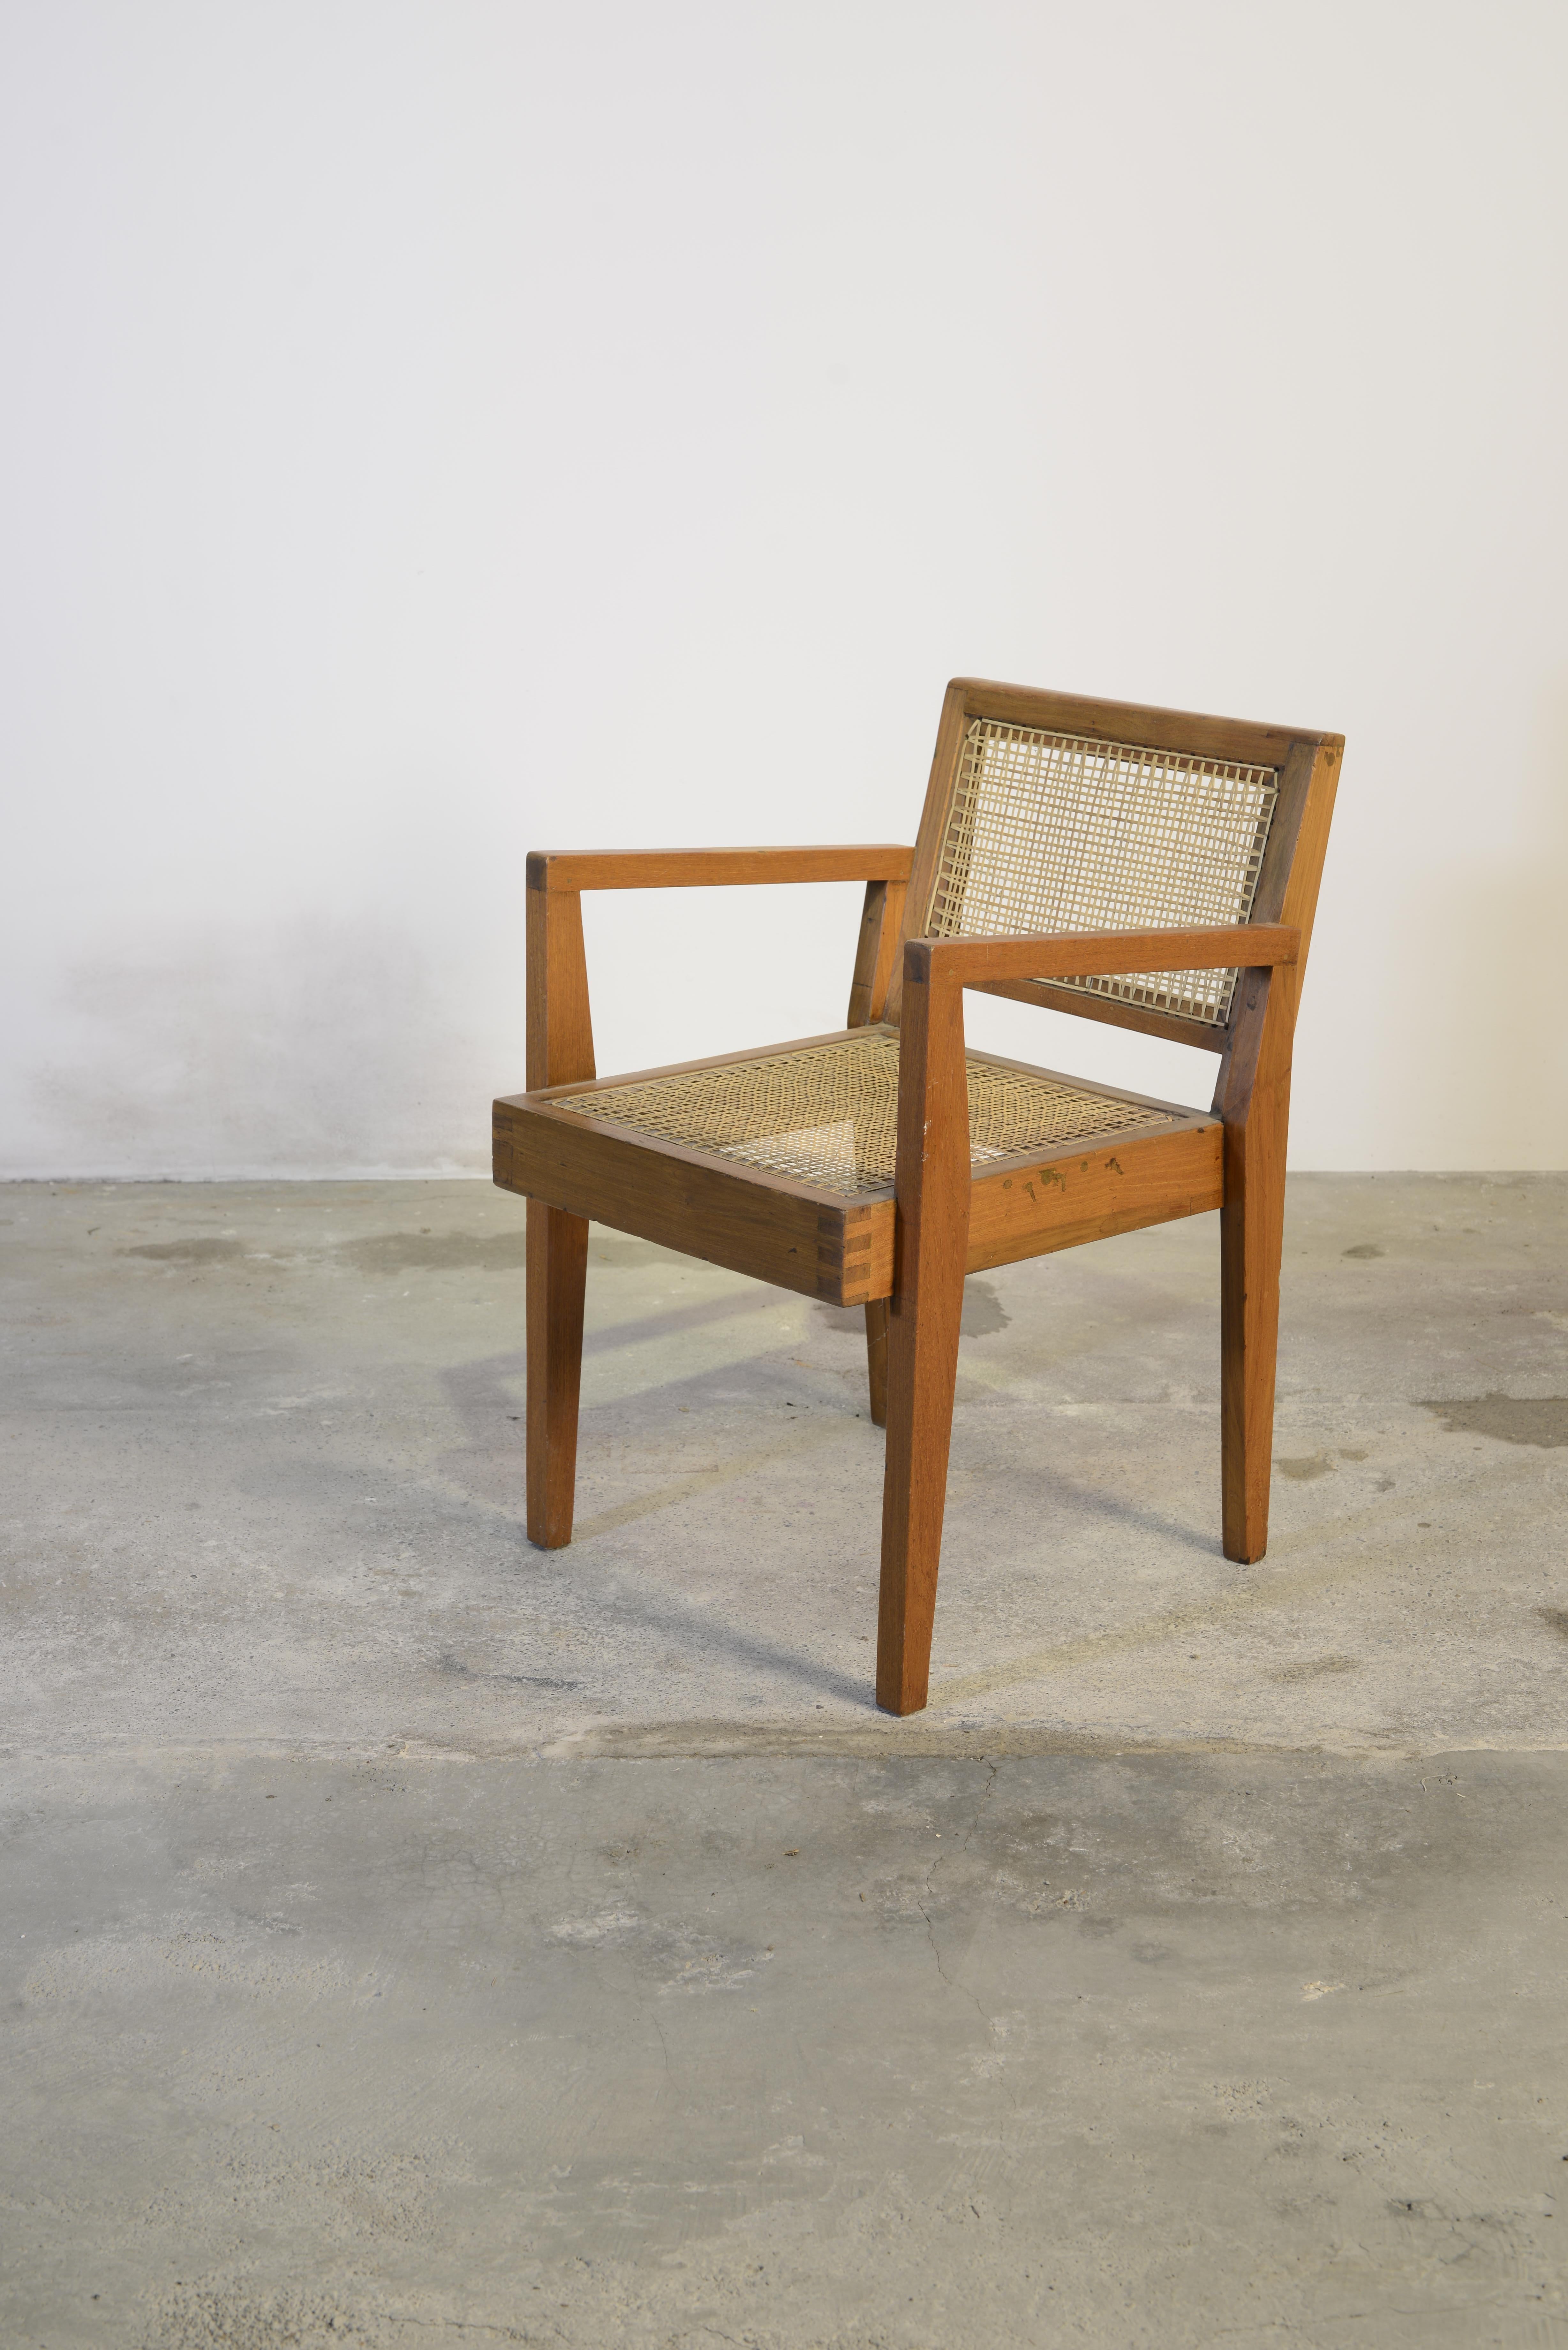 This chair is not only a fantastic piece, it’s iconic. It is raw in its simplicity and somehow has this strong, almost masculine attitude. There is also something deeply relaxing about this design but at the same time it’s very sharp and fierce. The